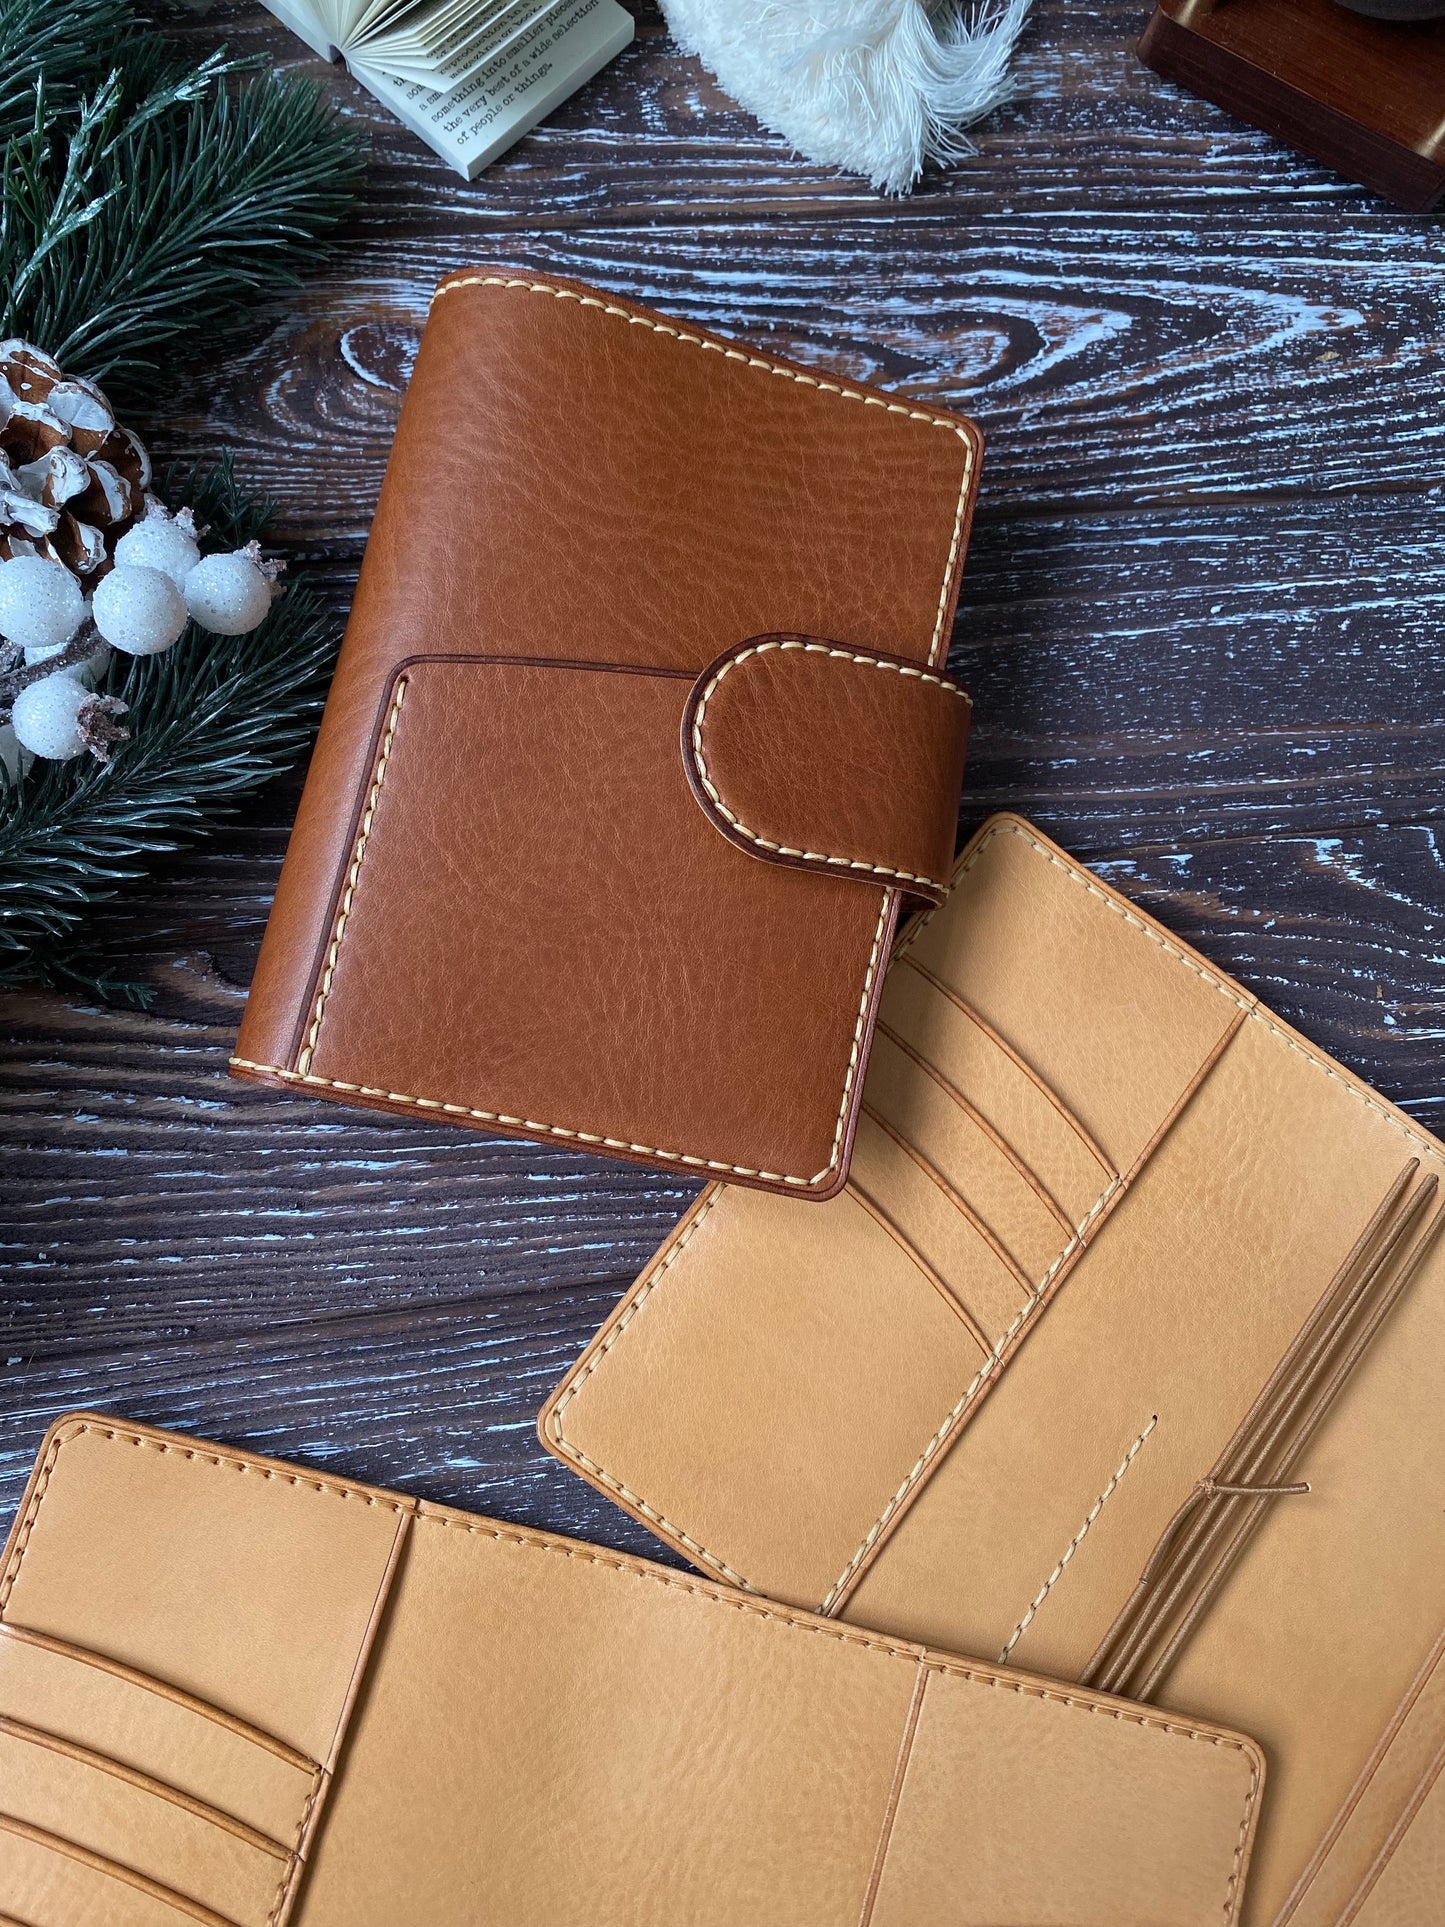 A6 leather planner cover (Hobonichi A6, Stalogy A6 notebooks)